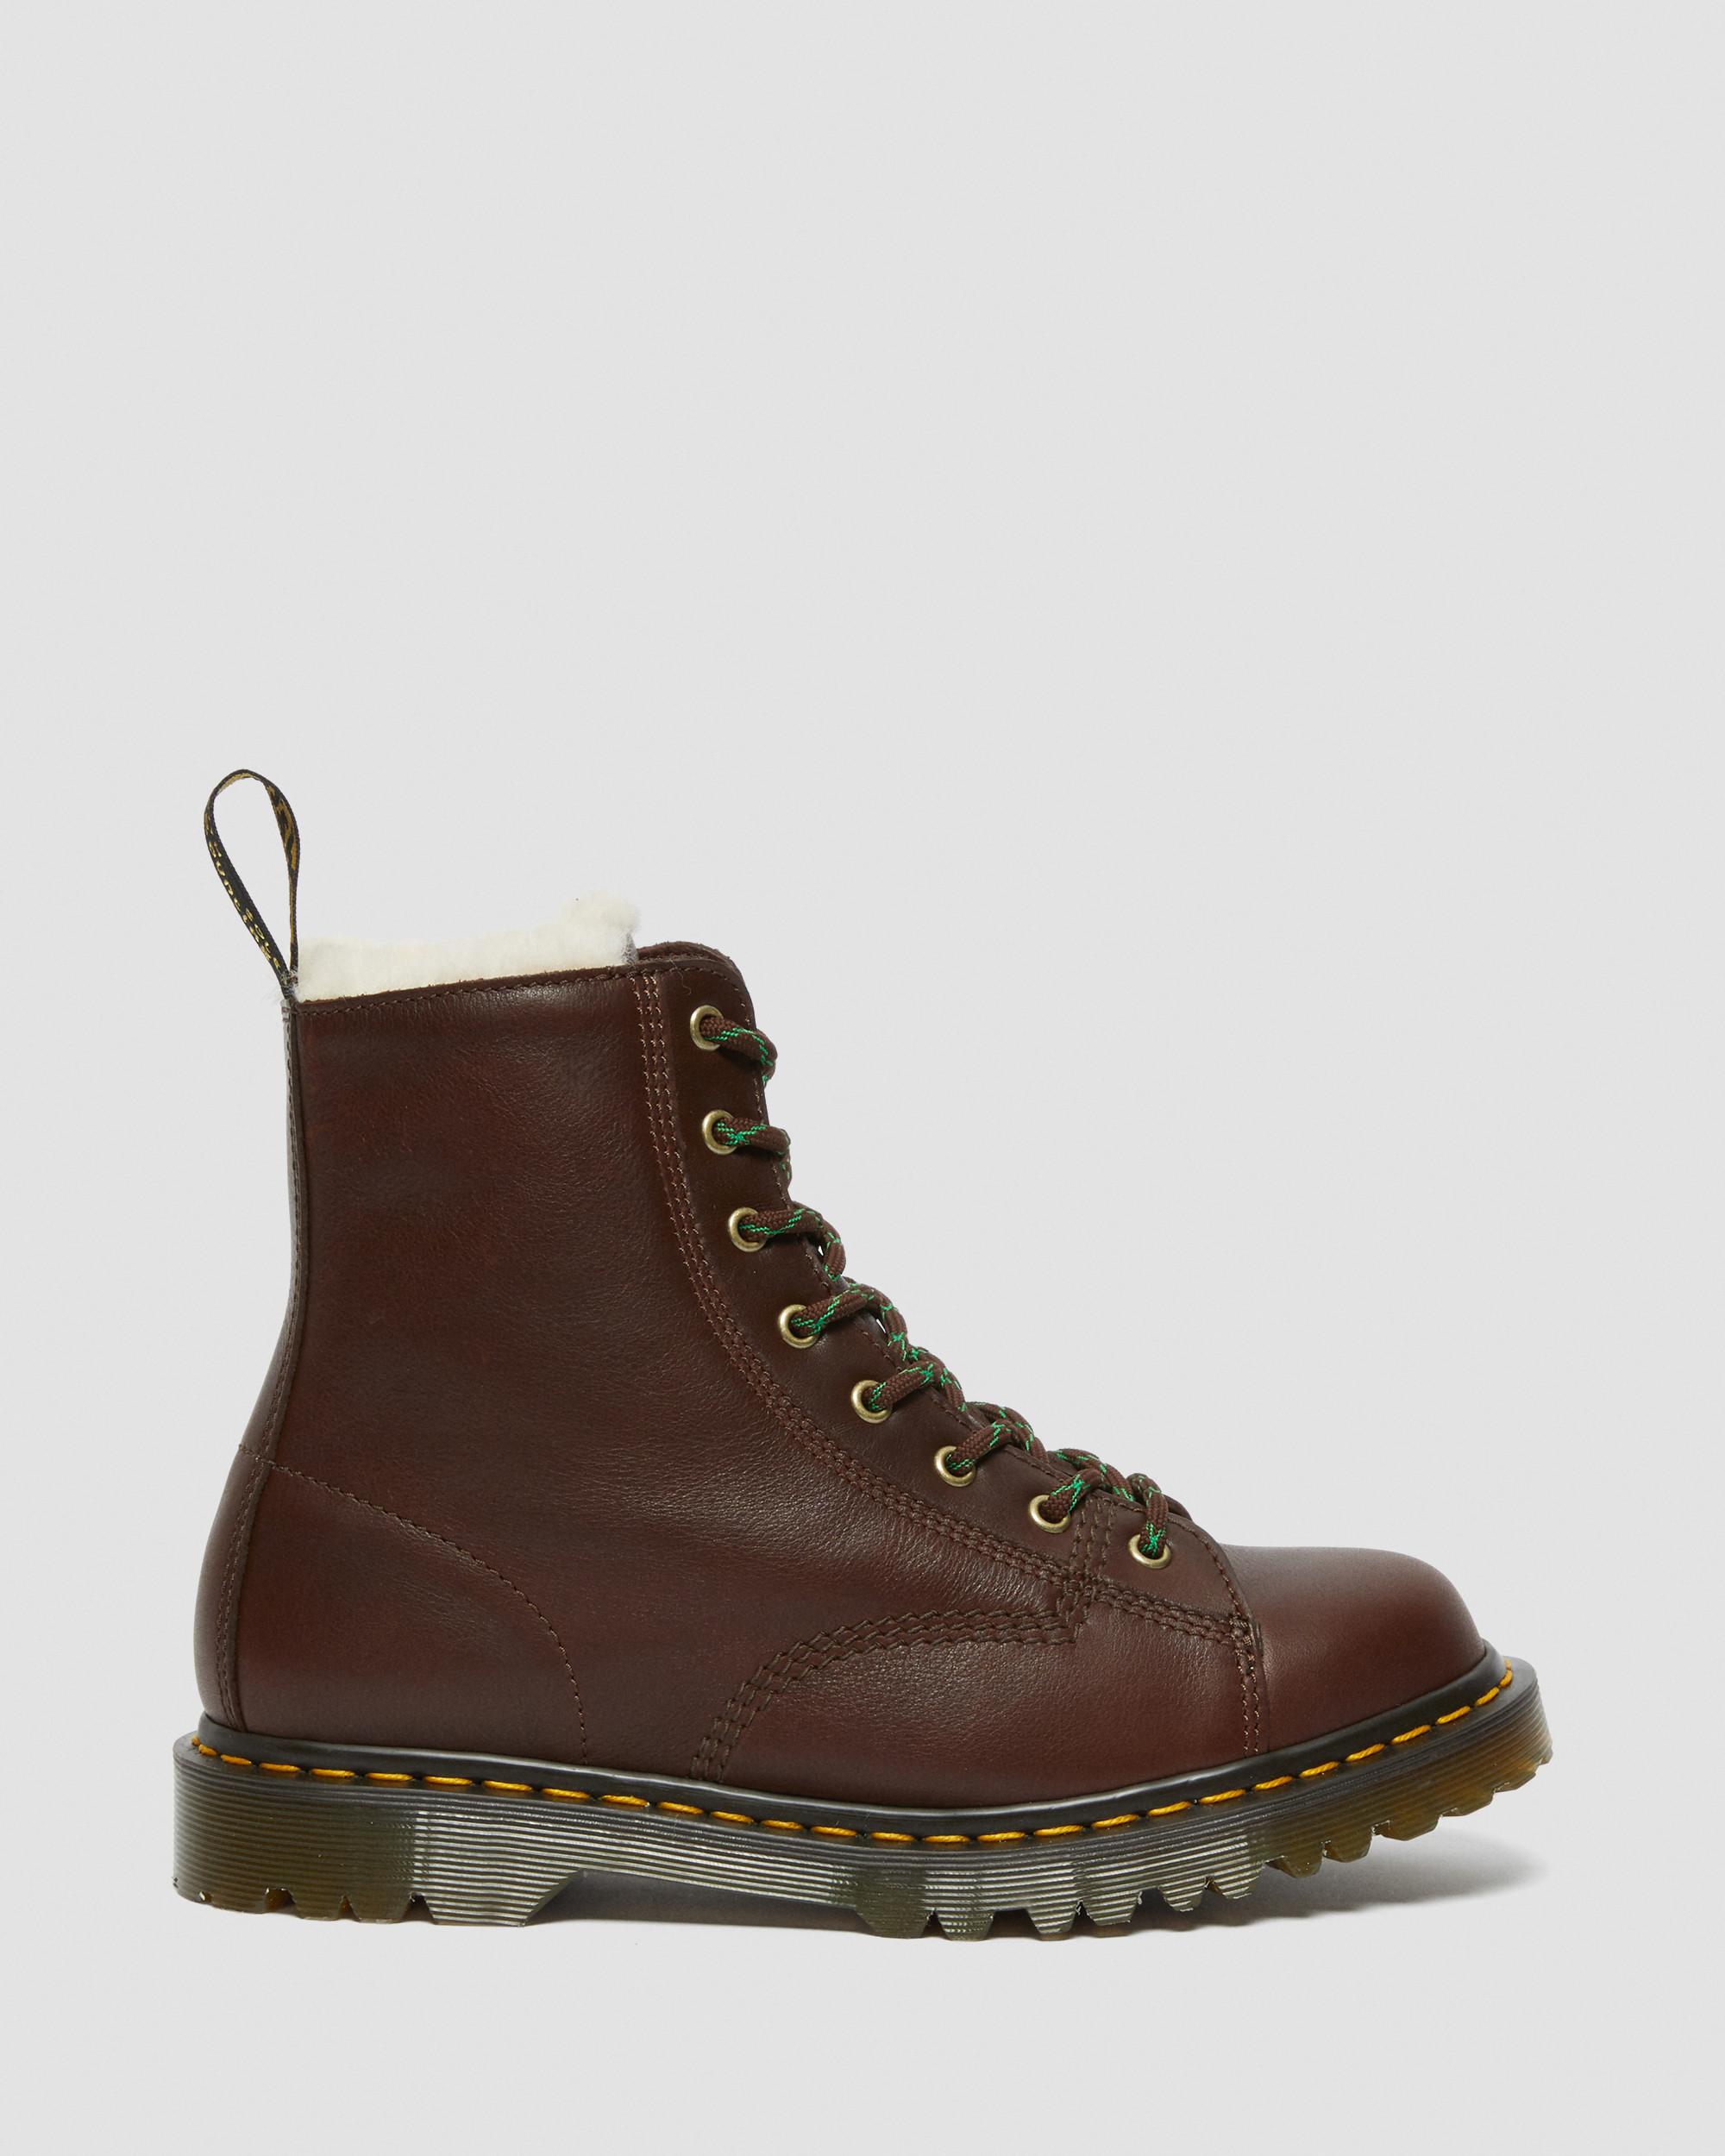 Barton Shearling Lined Brown Leather Ankle BootsBarton Shearling Lined Leather Ankle Boots Dr. Martens